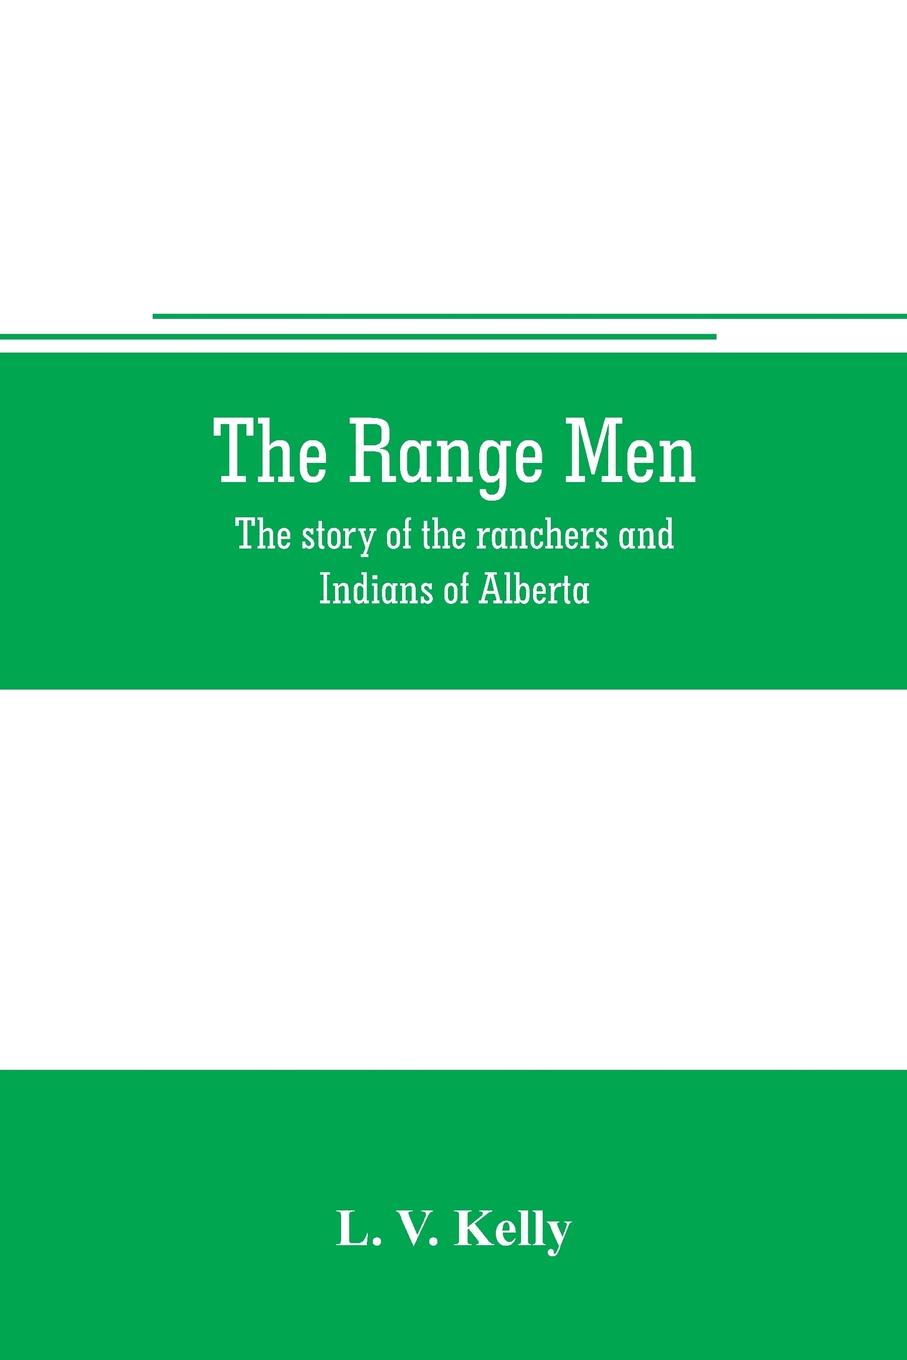 The range men. the story of the ranchers and Indians of Alberta